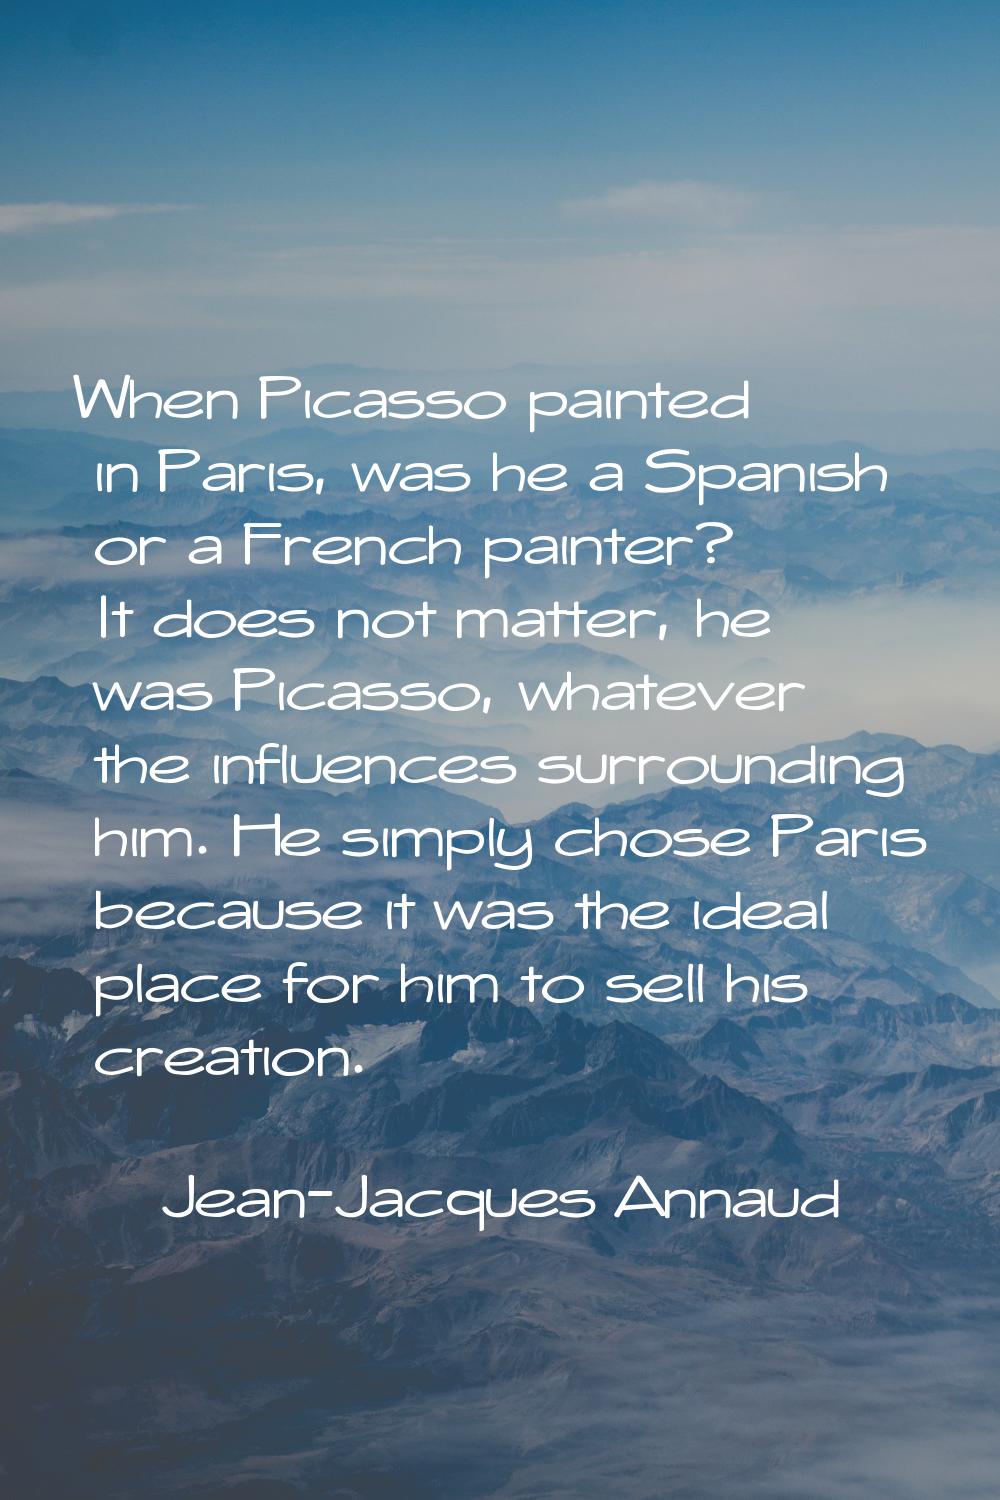 When Picasso painted in Paris, was he a Spanish or a French painter? It does not matter, he was Pic